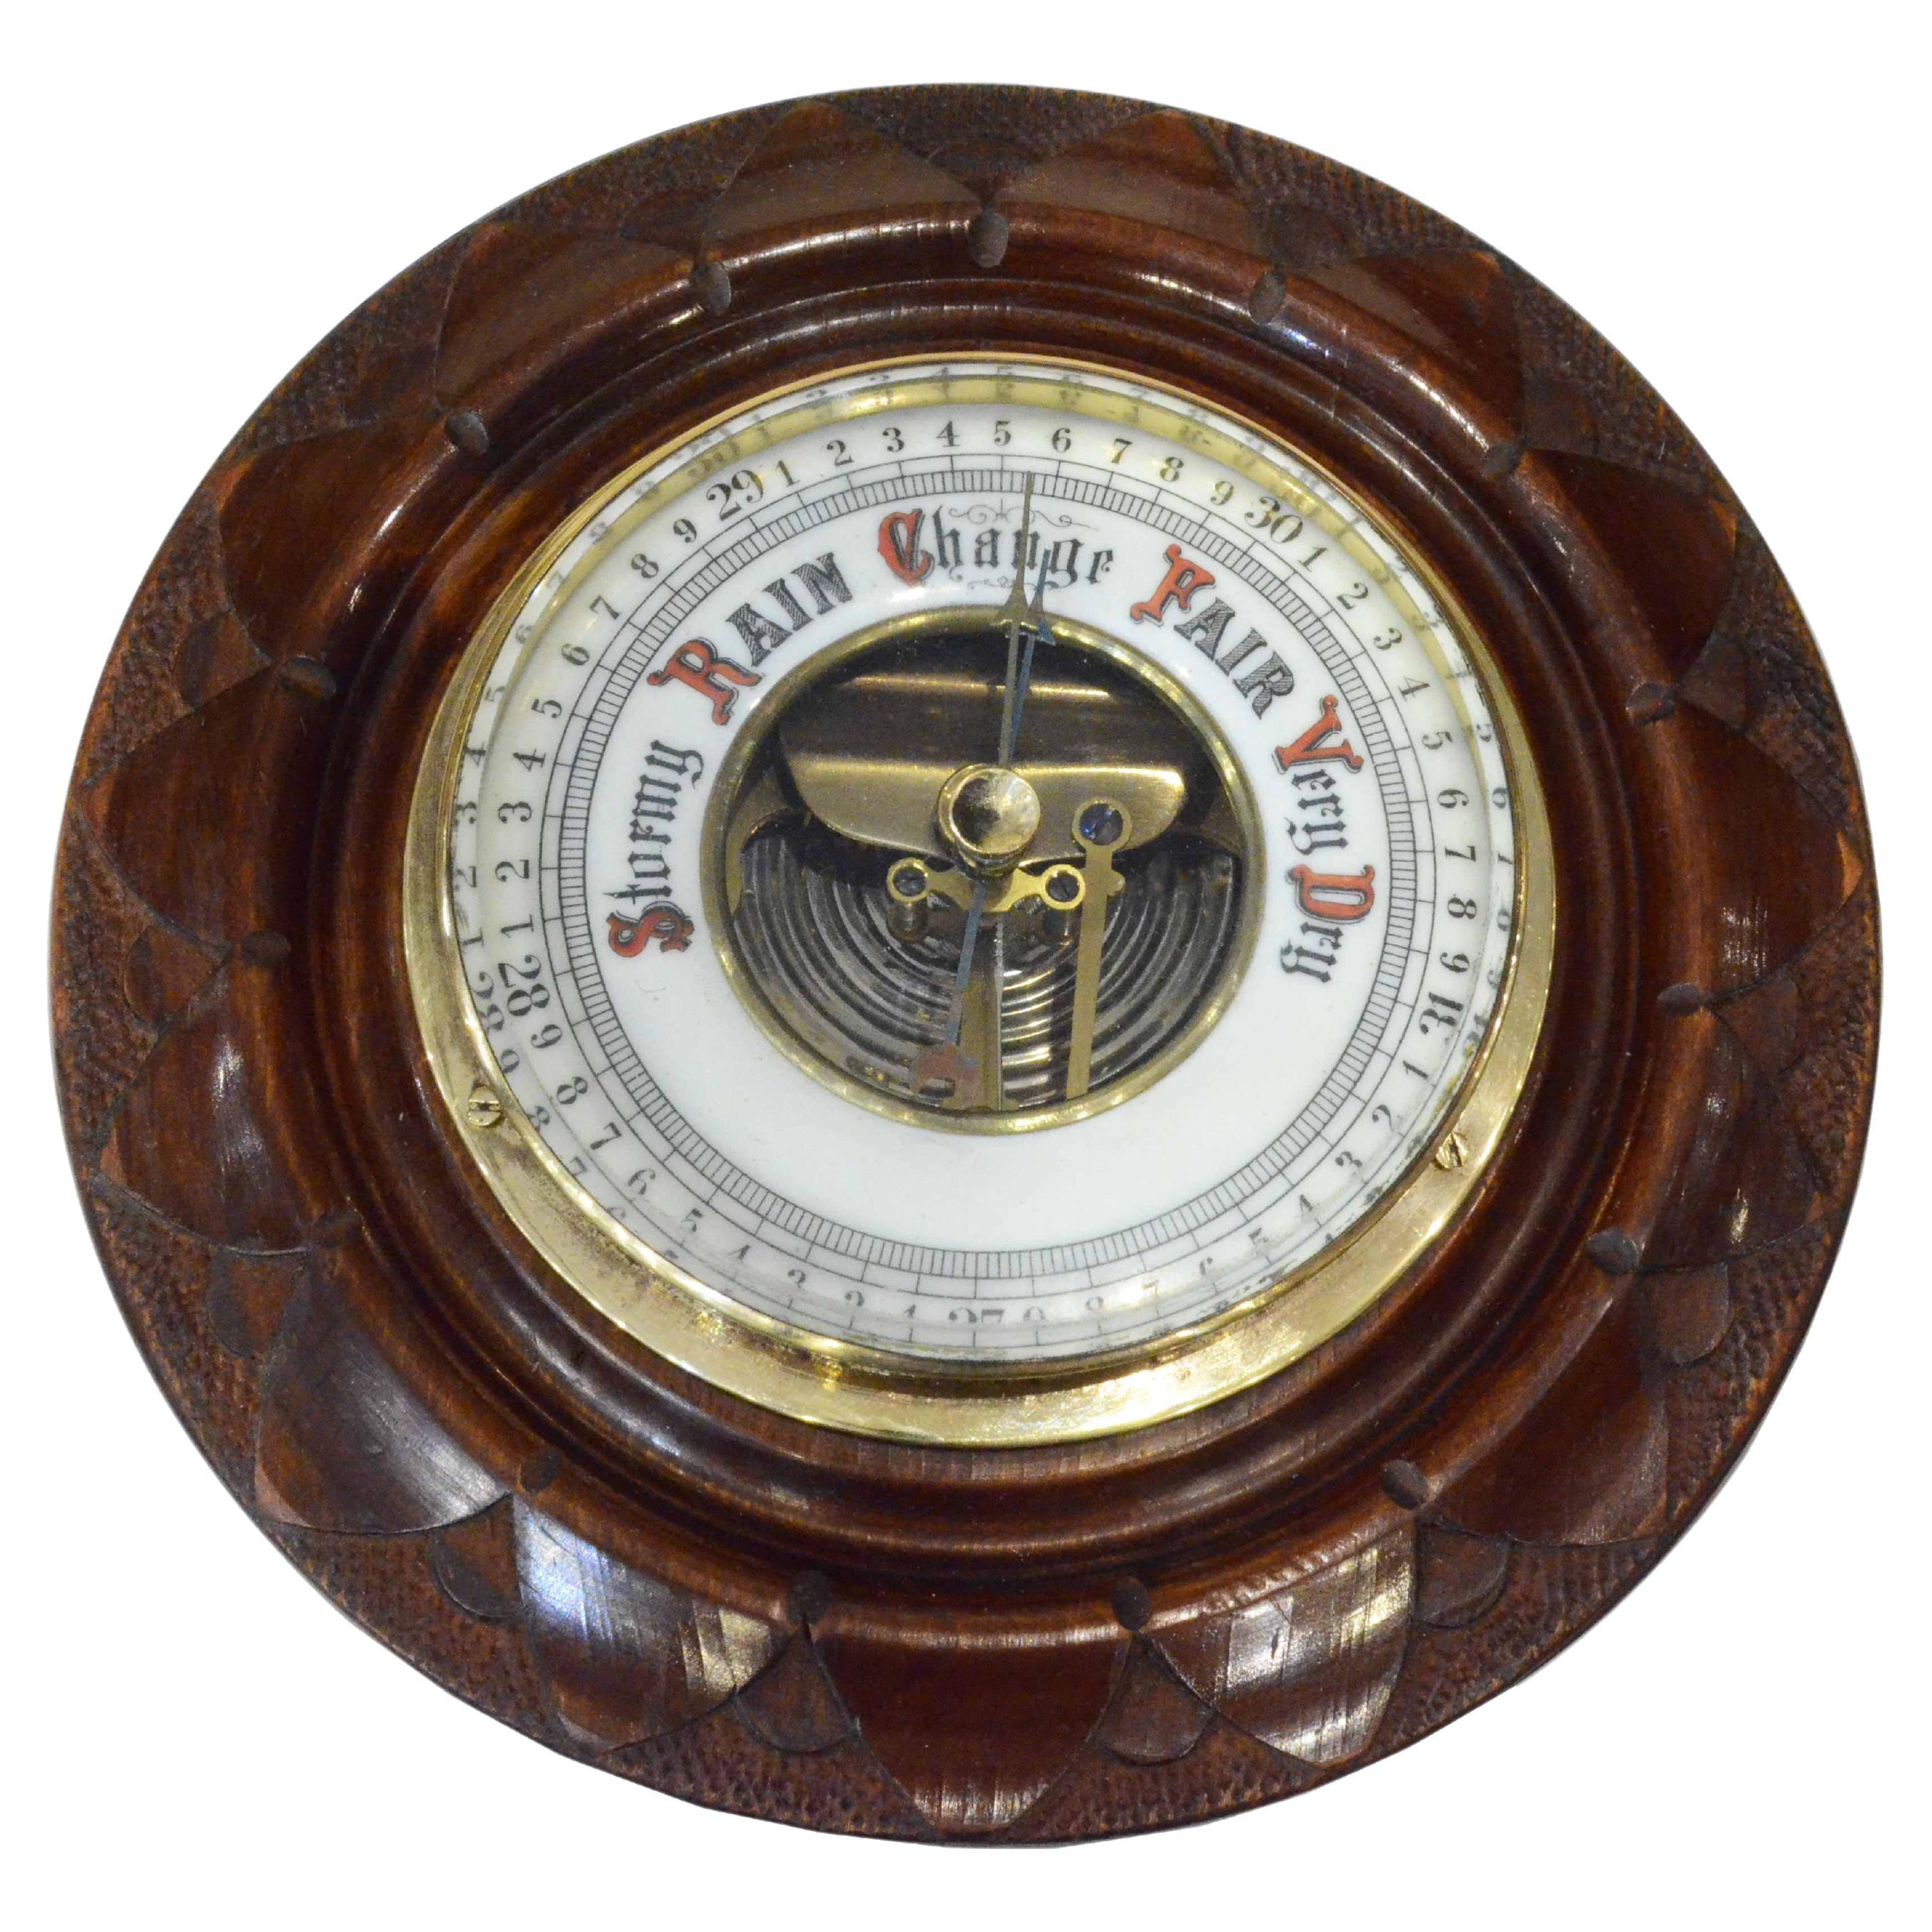 Eaerly 1900s English Carved Woodd Aneroid Barometer Antique Forecast Instrument